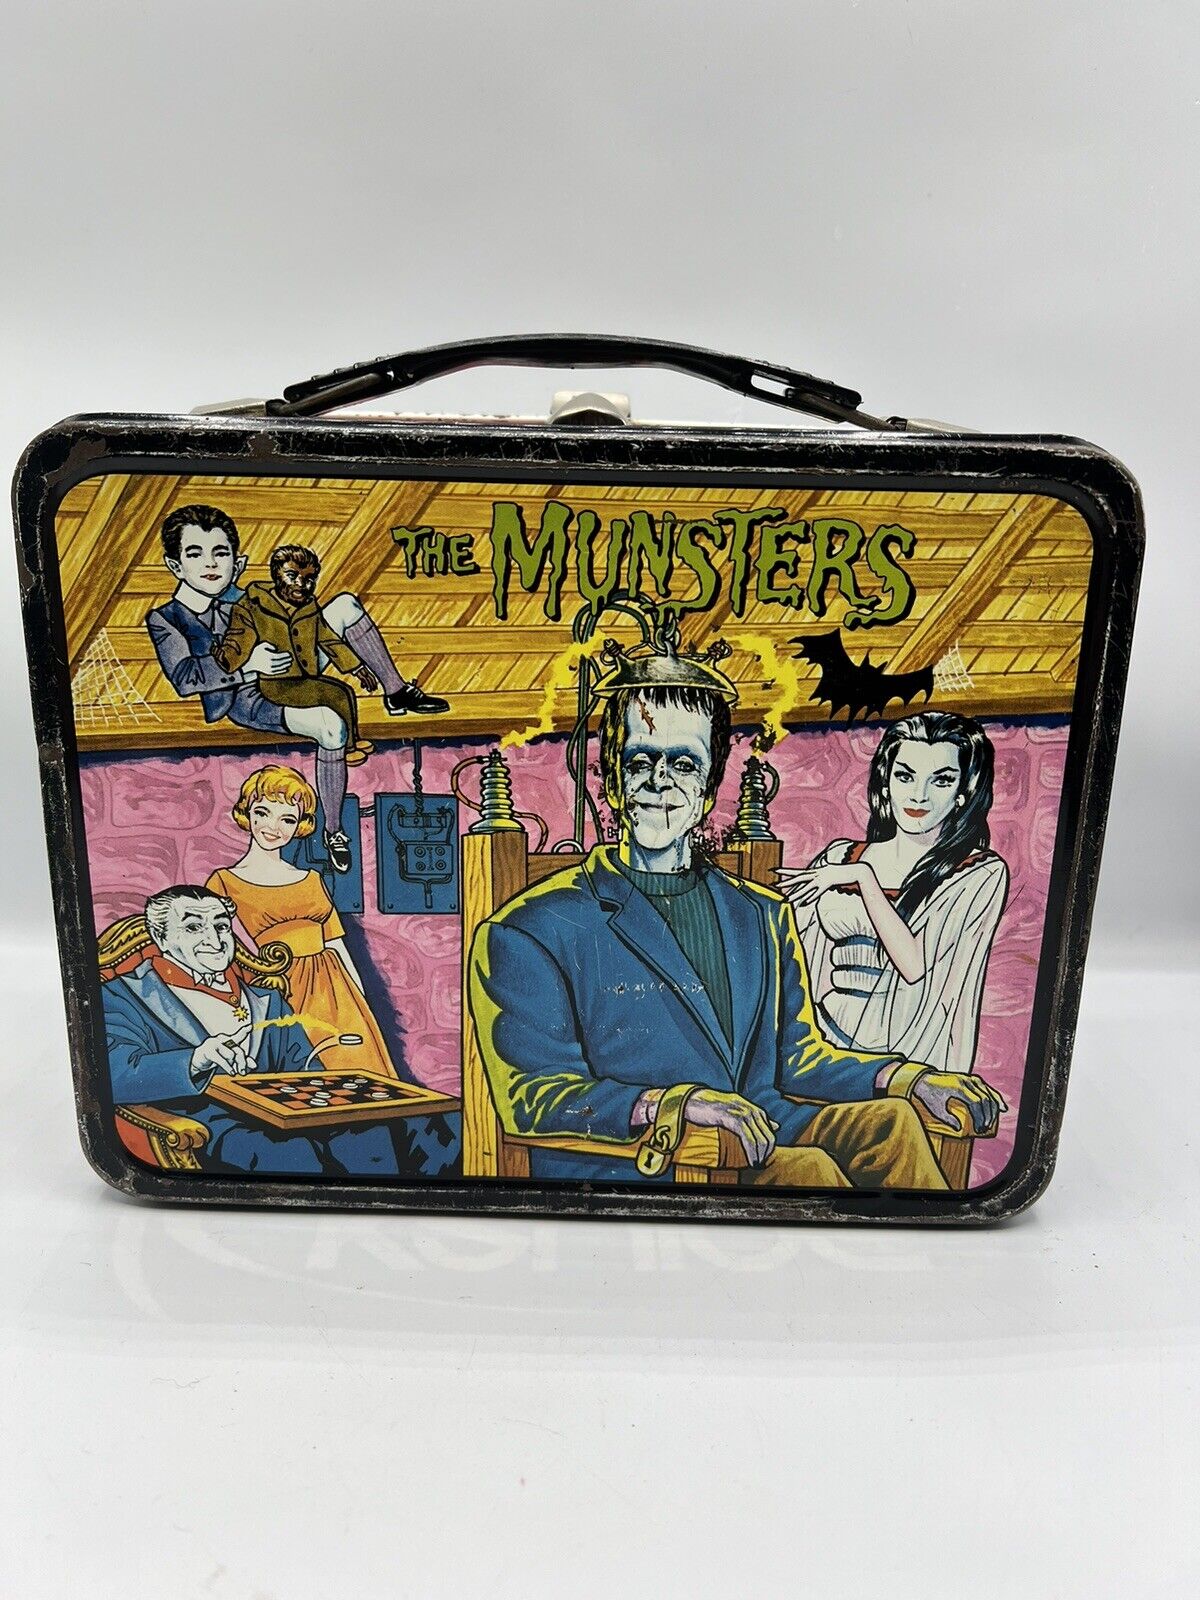 Vintage 1965 MUNSTERS Lunchbox Kayro Vue Productions See Pics For Cond.